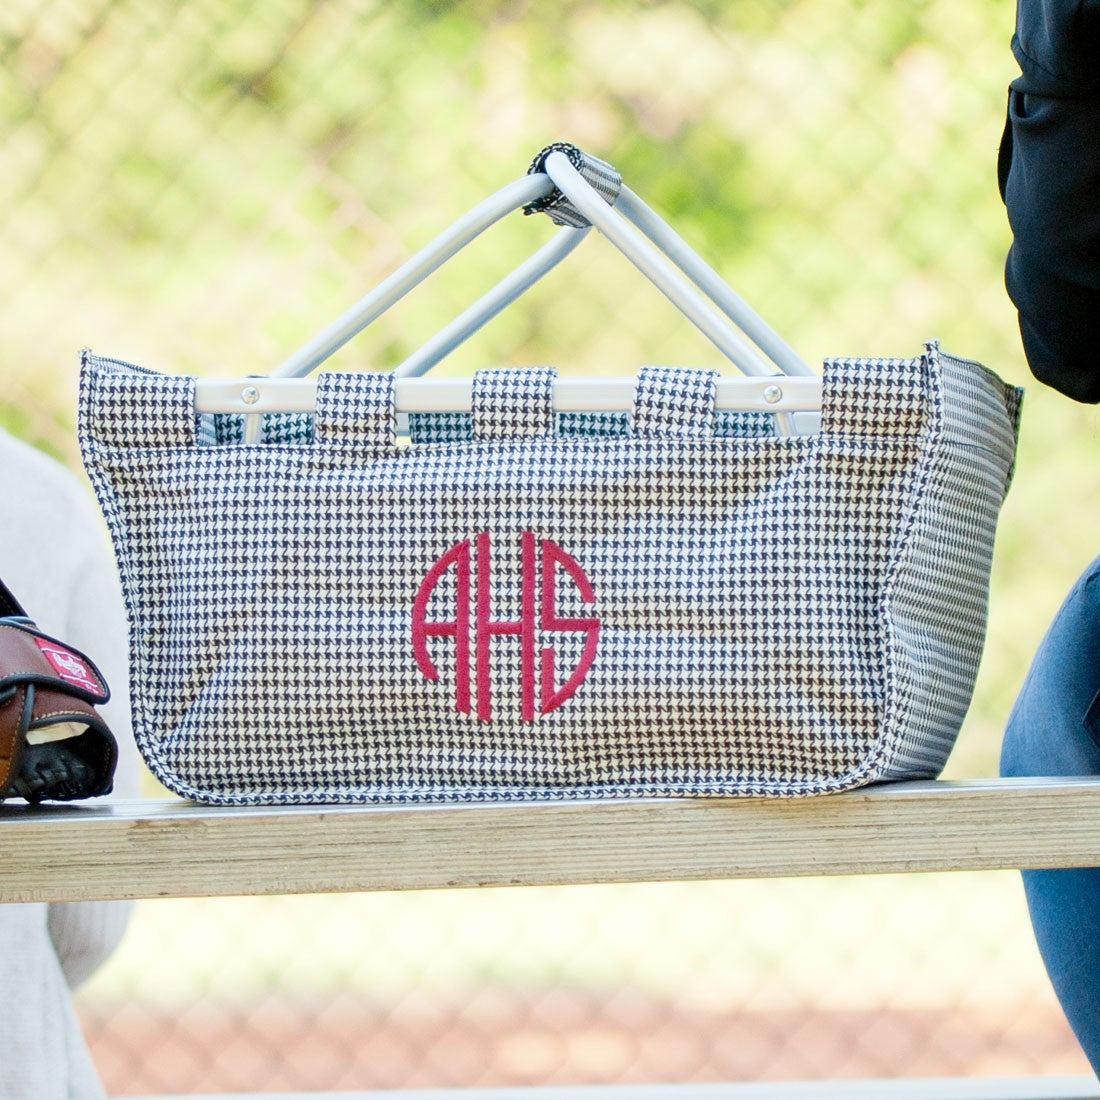 Houndstooth Market Tote - The ultimate versatile tote!